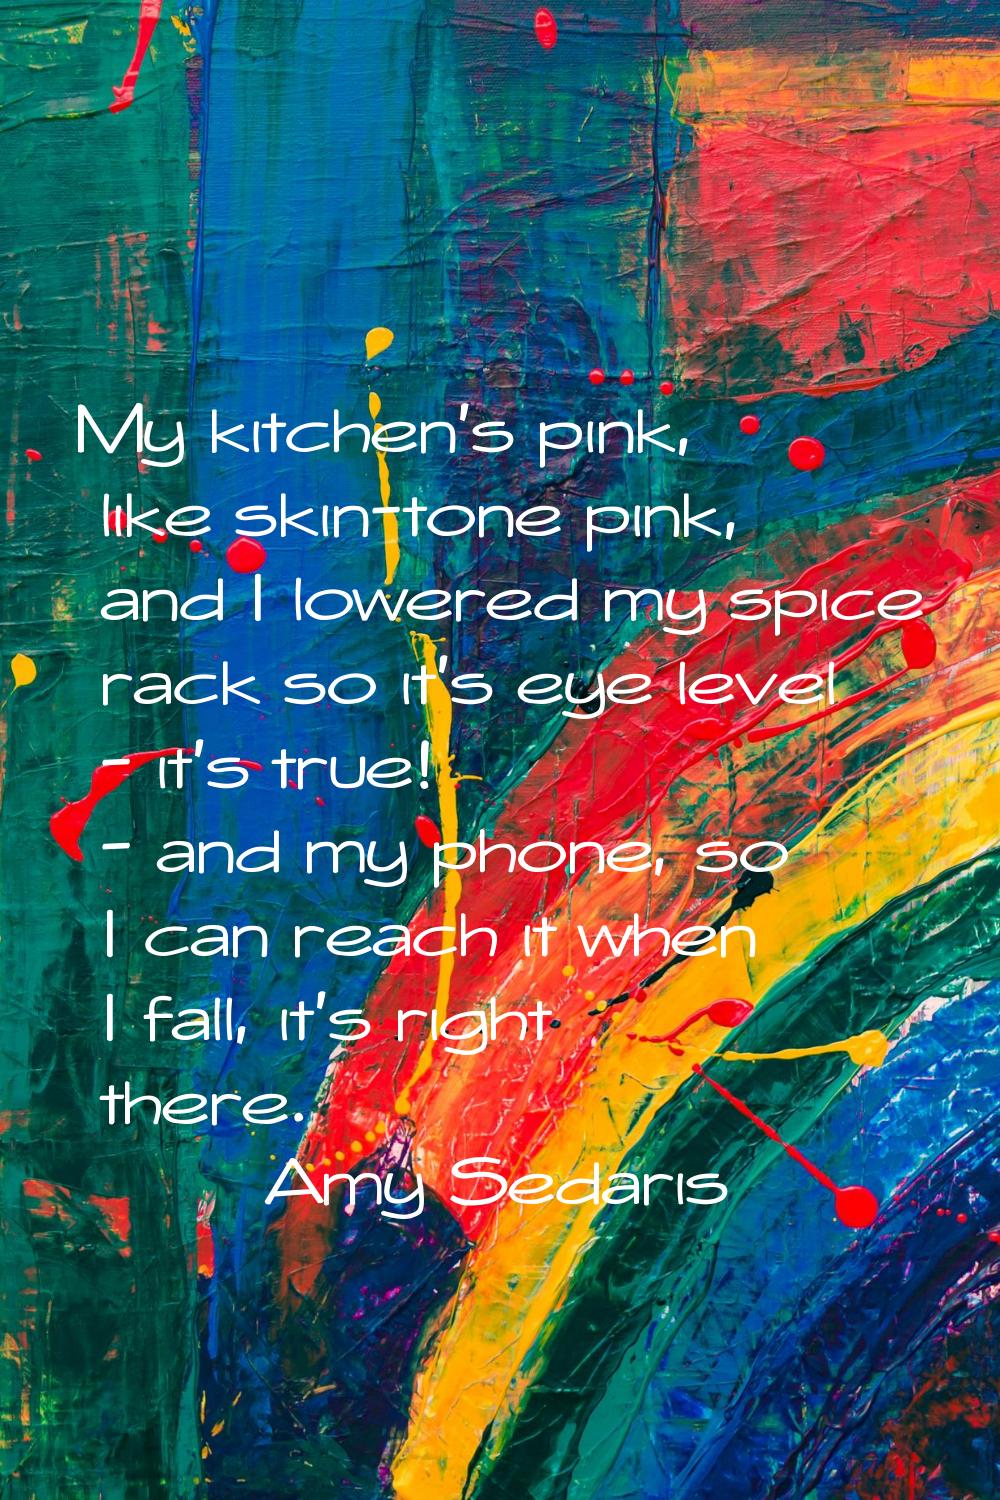 My kitchen's pink, like skin-tone pink, and I lowered my spice rack so it's eye level - it's true! 